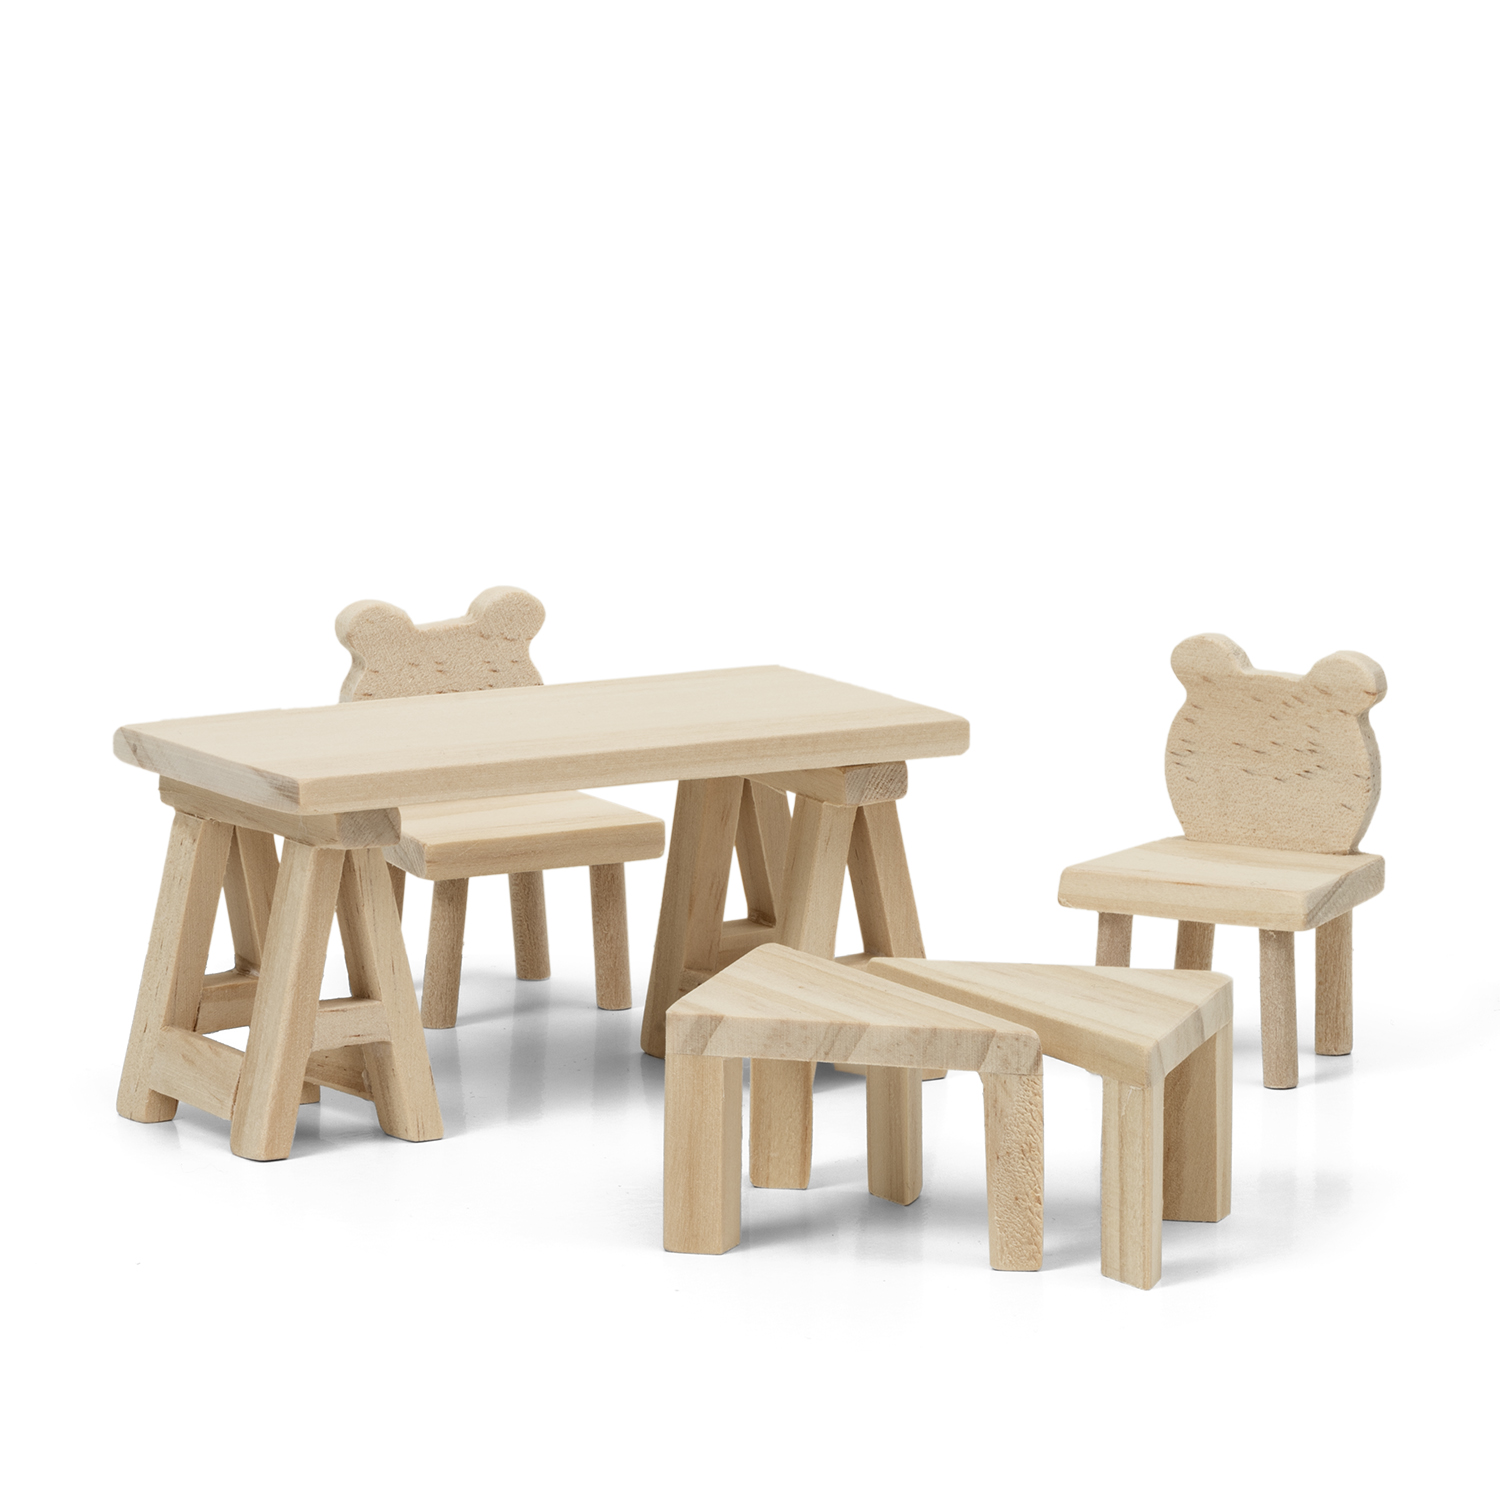 Wooden toys lundby dollhouse furniture table & chairs natural wood